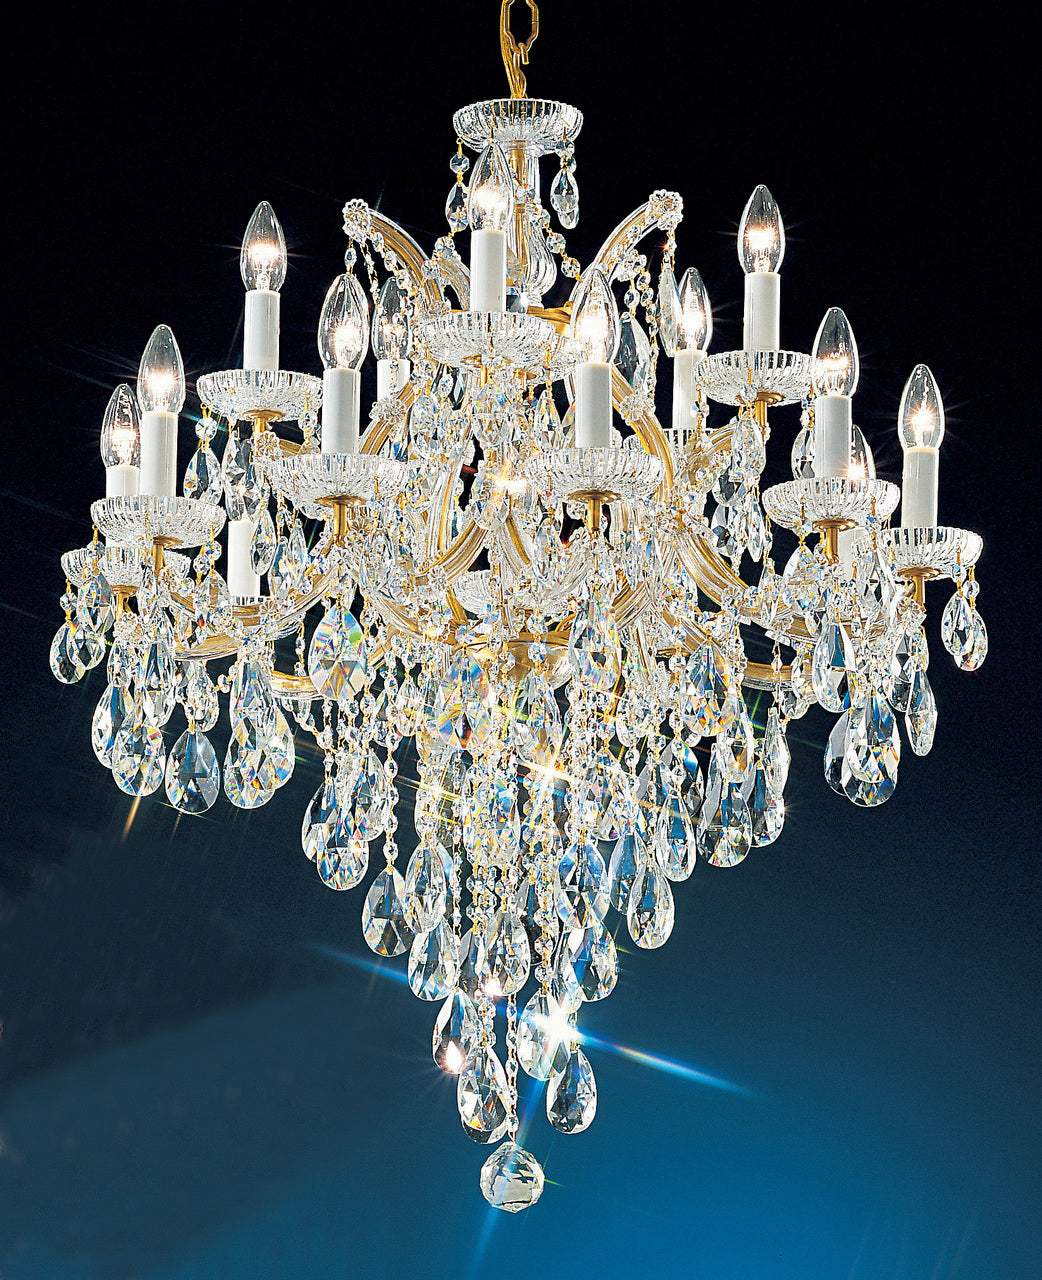 Classic Lighting 8126 OWG S Maria Theresa Traditional Crystal Chandelier in Olde World Gold (Imported from Italy)